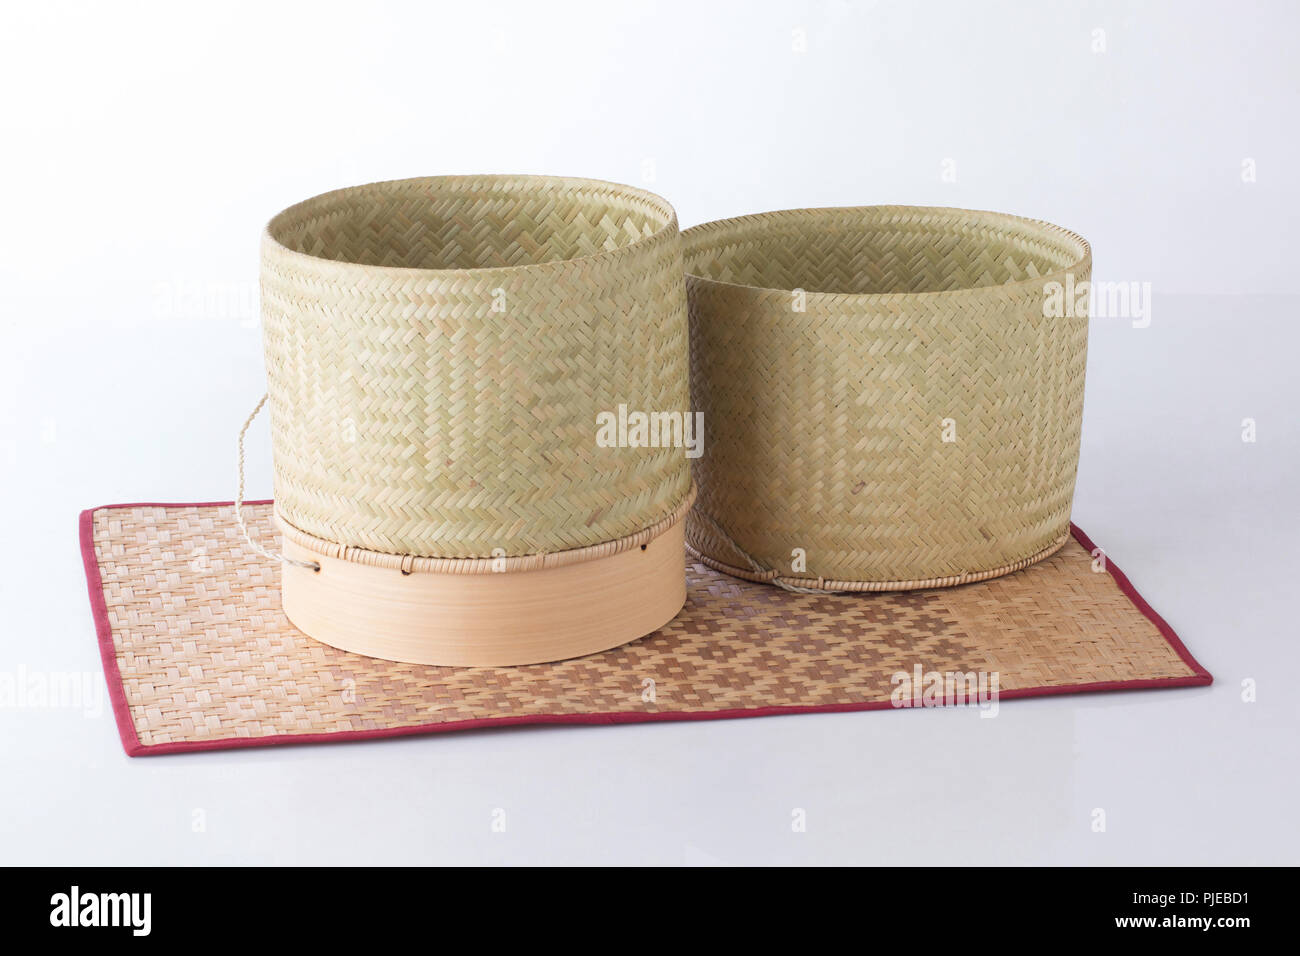 https://c8.alamy.com/comp/PJEBD1/a-wicker-bamboo-box-for-sticky-rice-keeping-on-bamboo-mat-PJEBD1.jpg